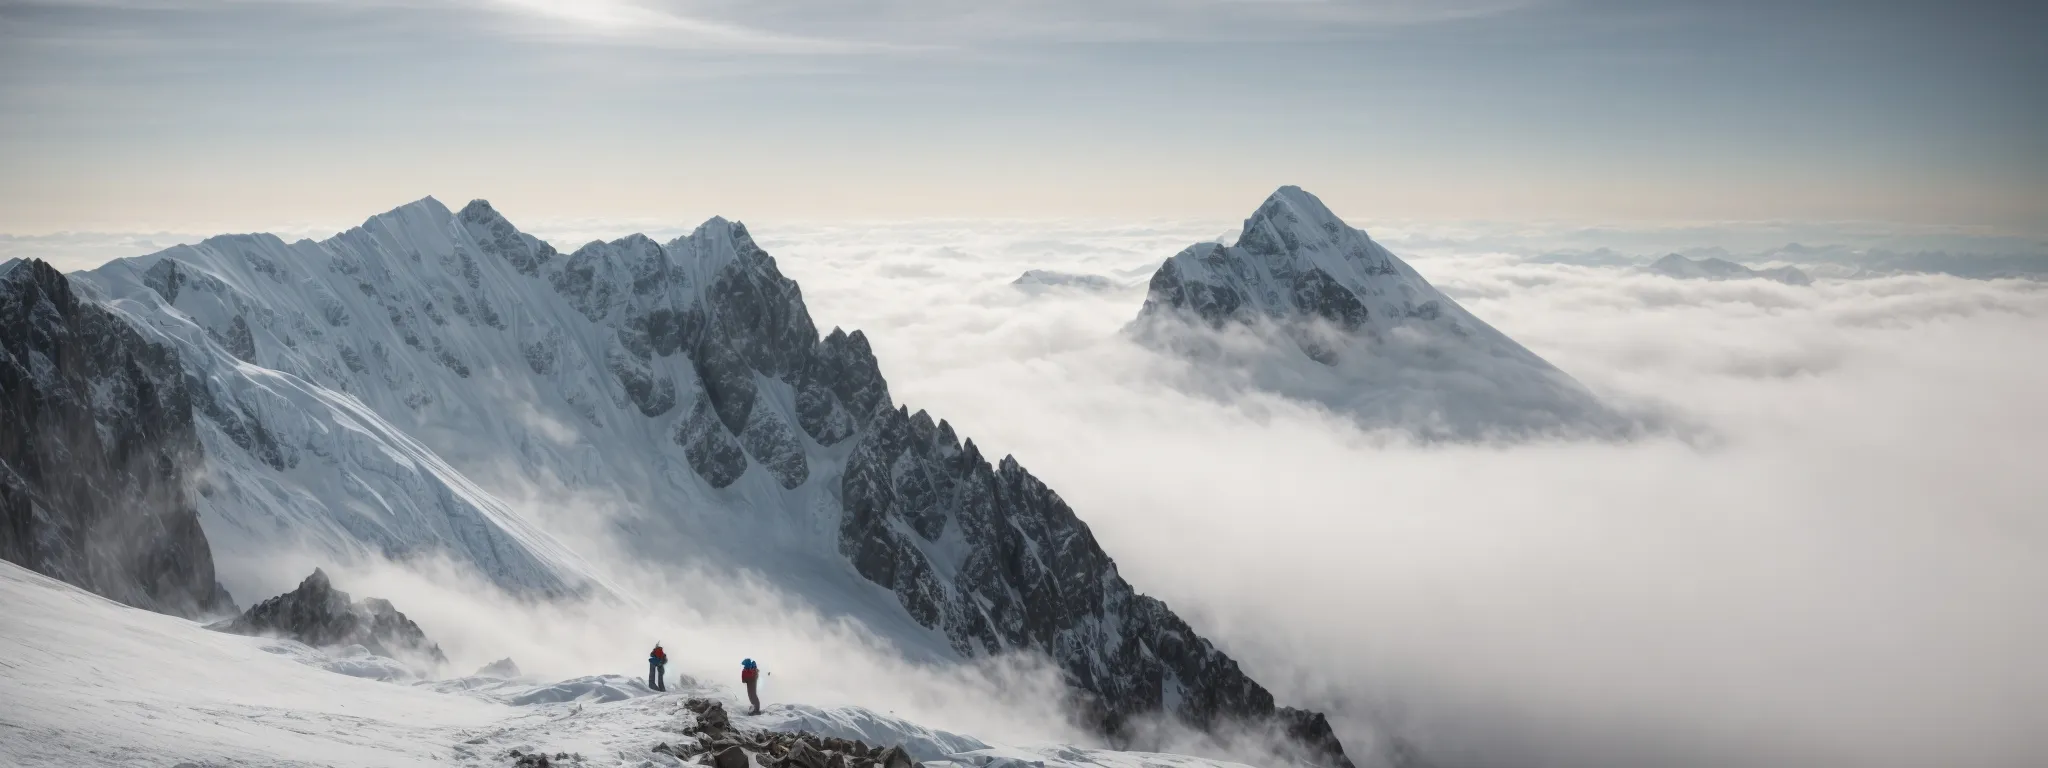 A Mountaineer With A Compass In Hand Assessing Their Route Up A Towering, Mist-Shrouded Mountain Summit.